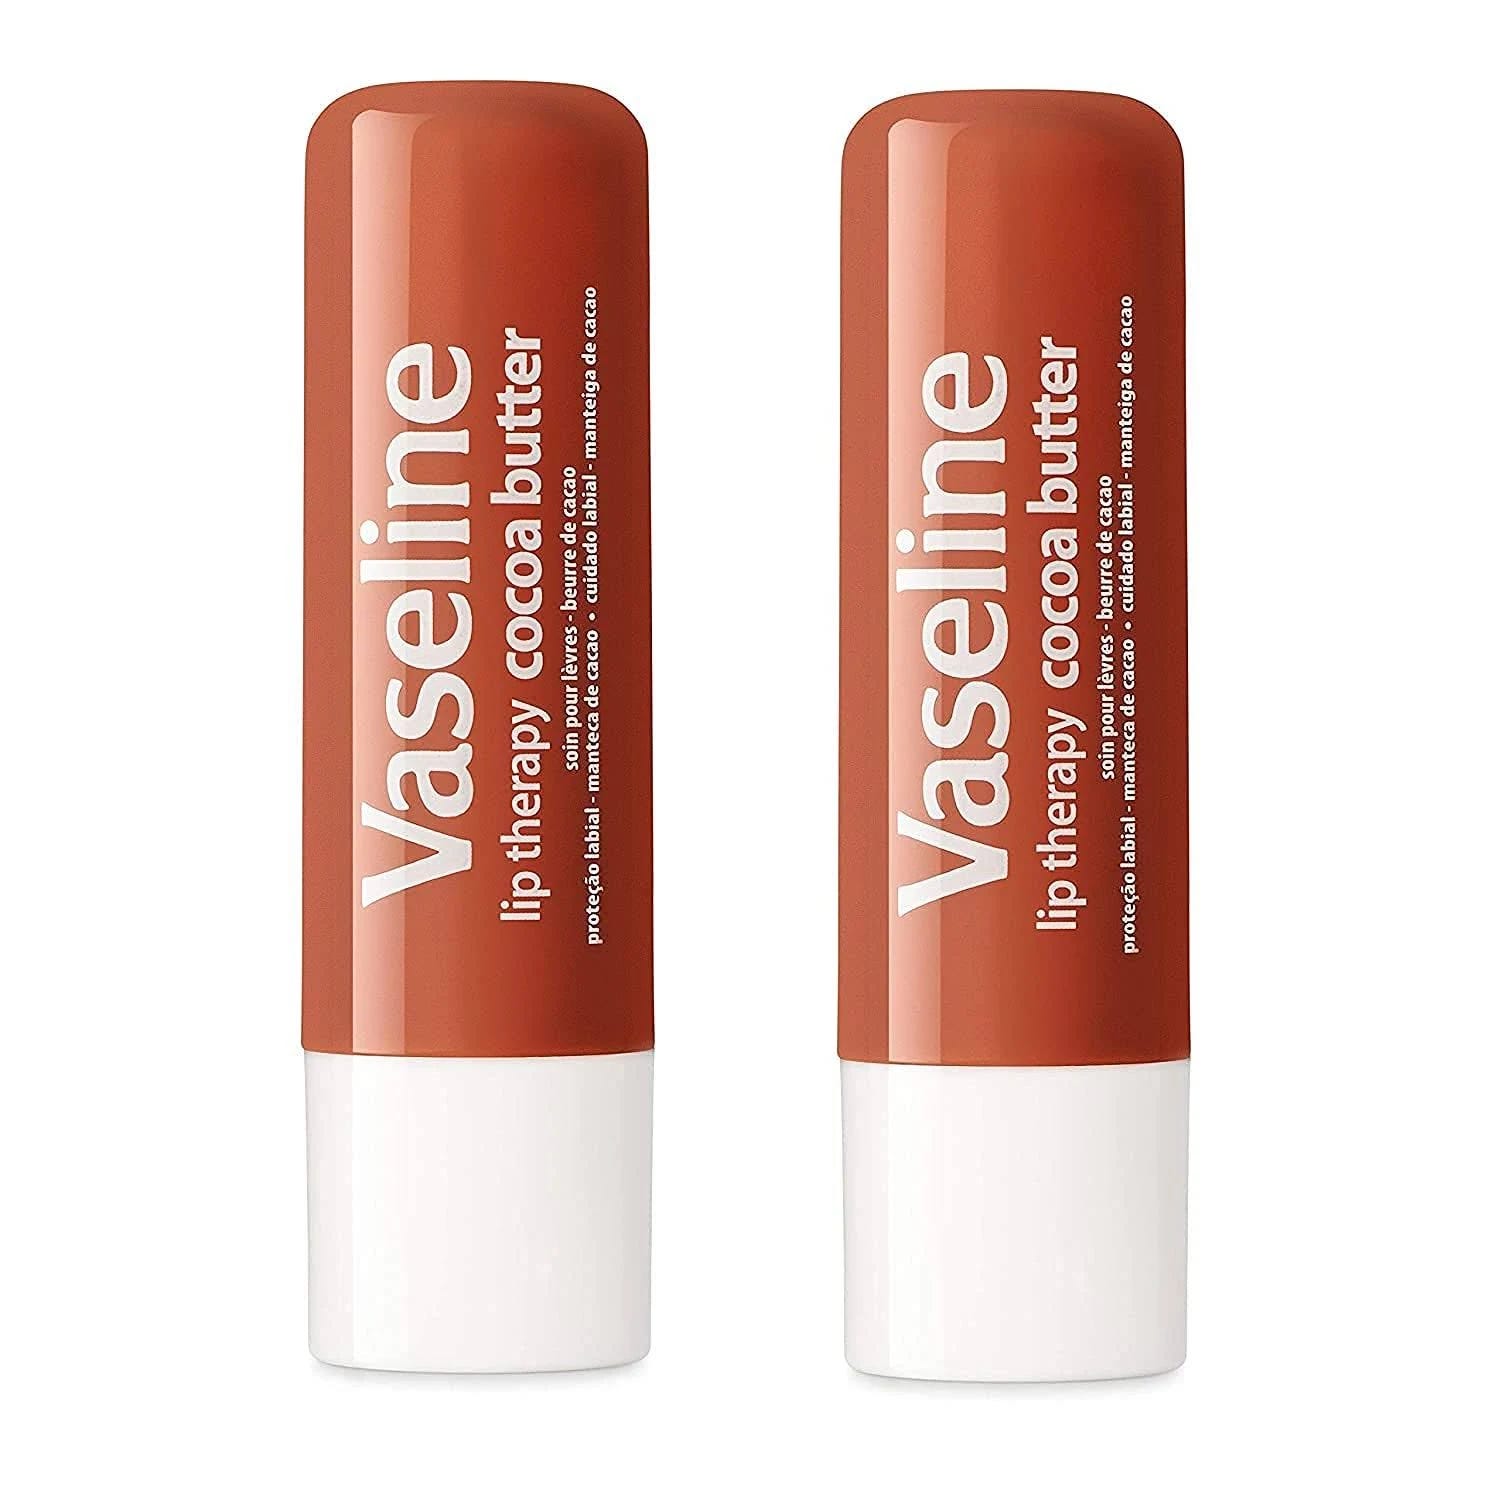 Vaseline Lip Therapy Stick with Petroleum Jelly - 2 Pack (Cocoa Butter) | Image